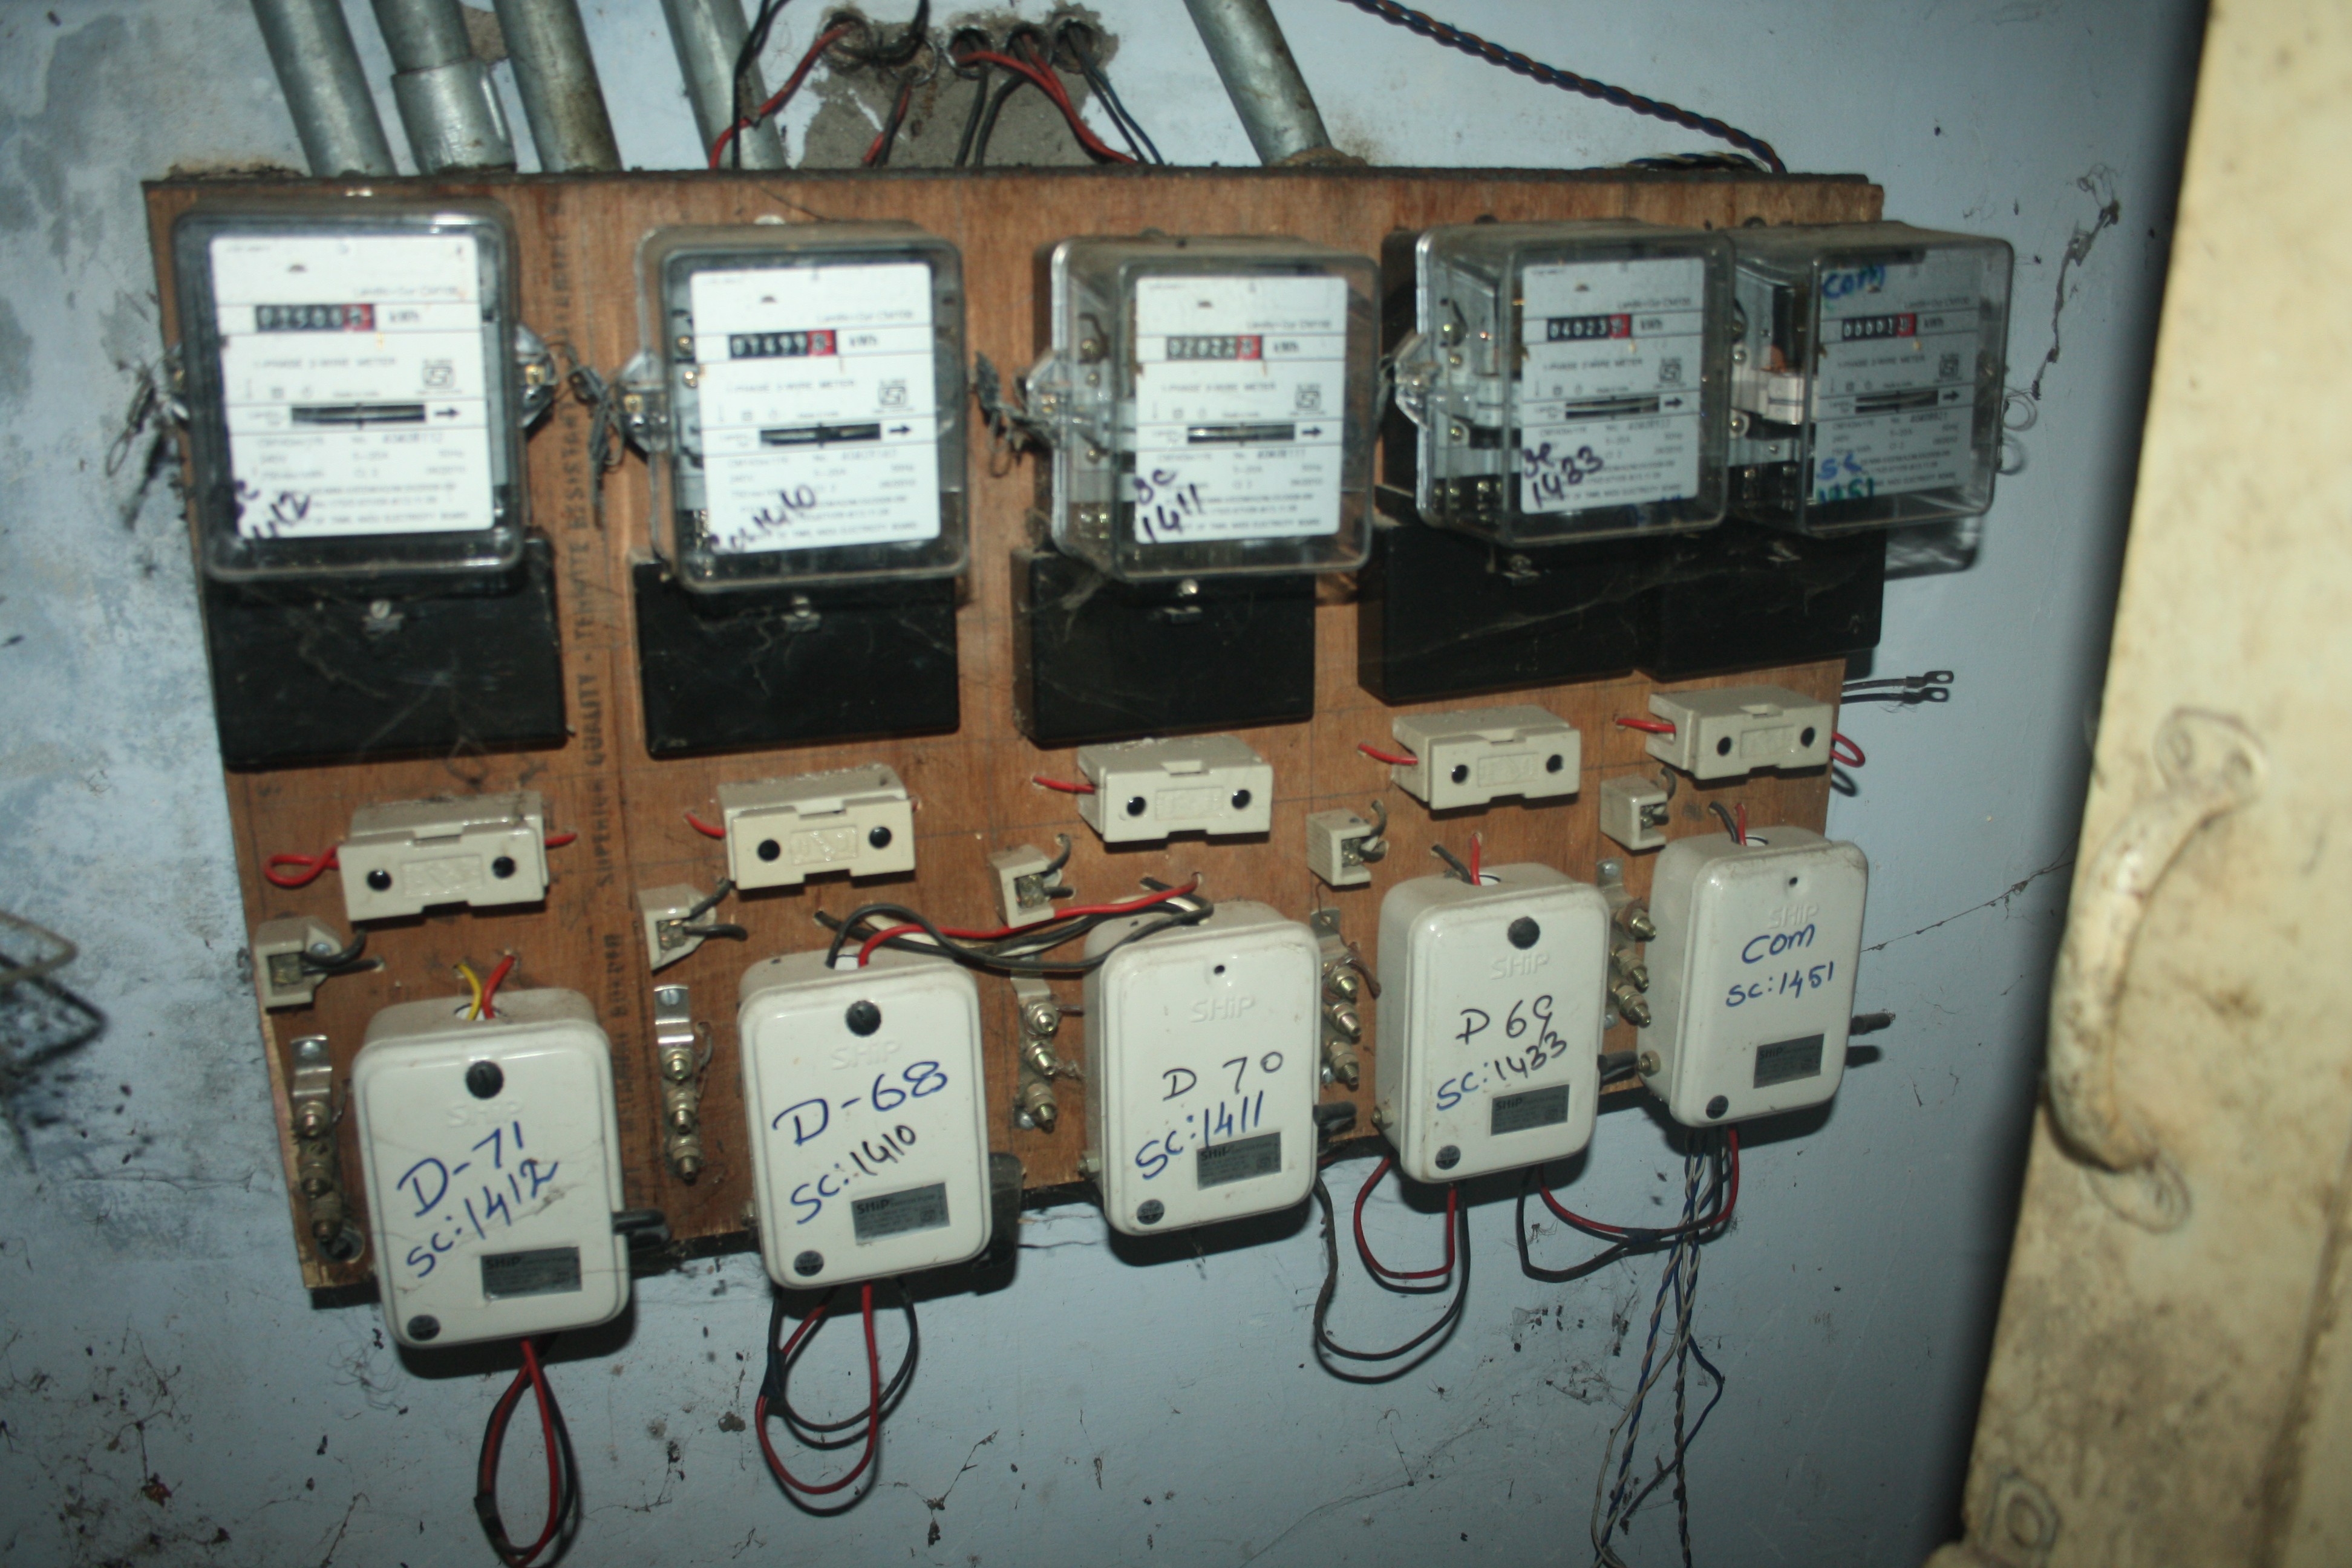 electrcity mains | source wikipedia https://upload.wikimedia.org/wikipedia/commons/f/f0/Electricity_meters_in_India.JPG